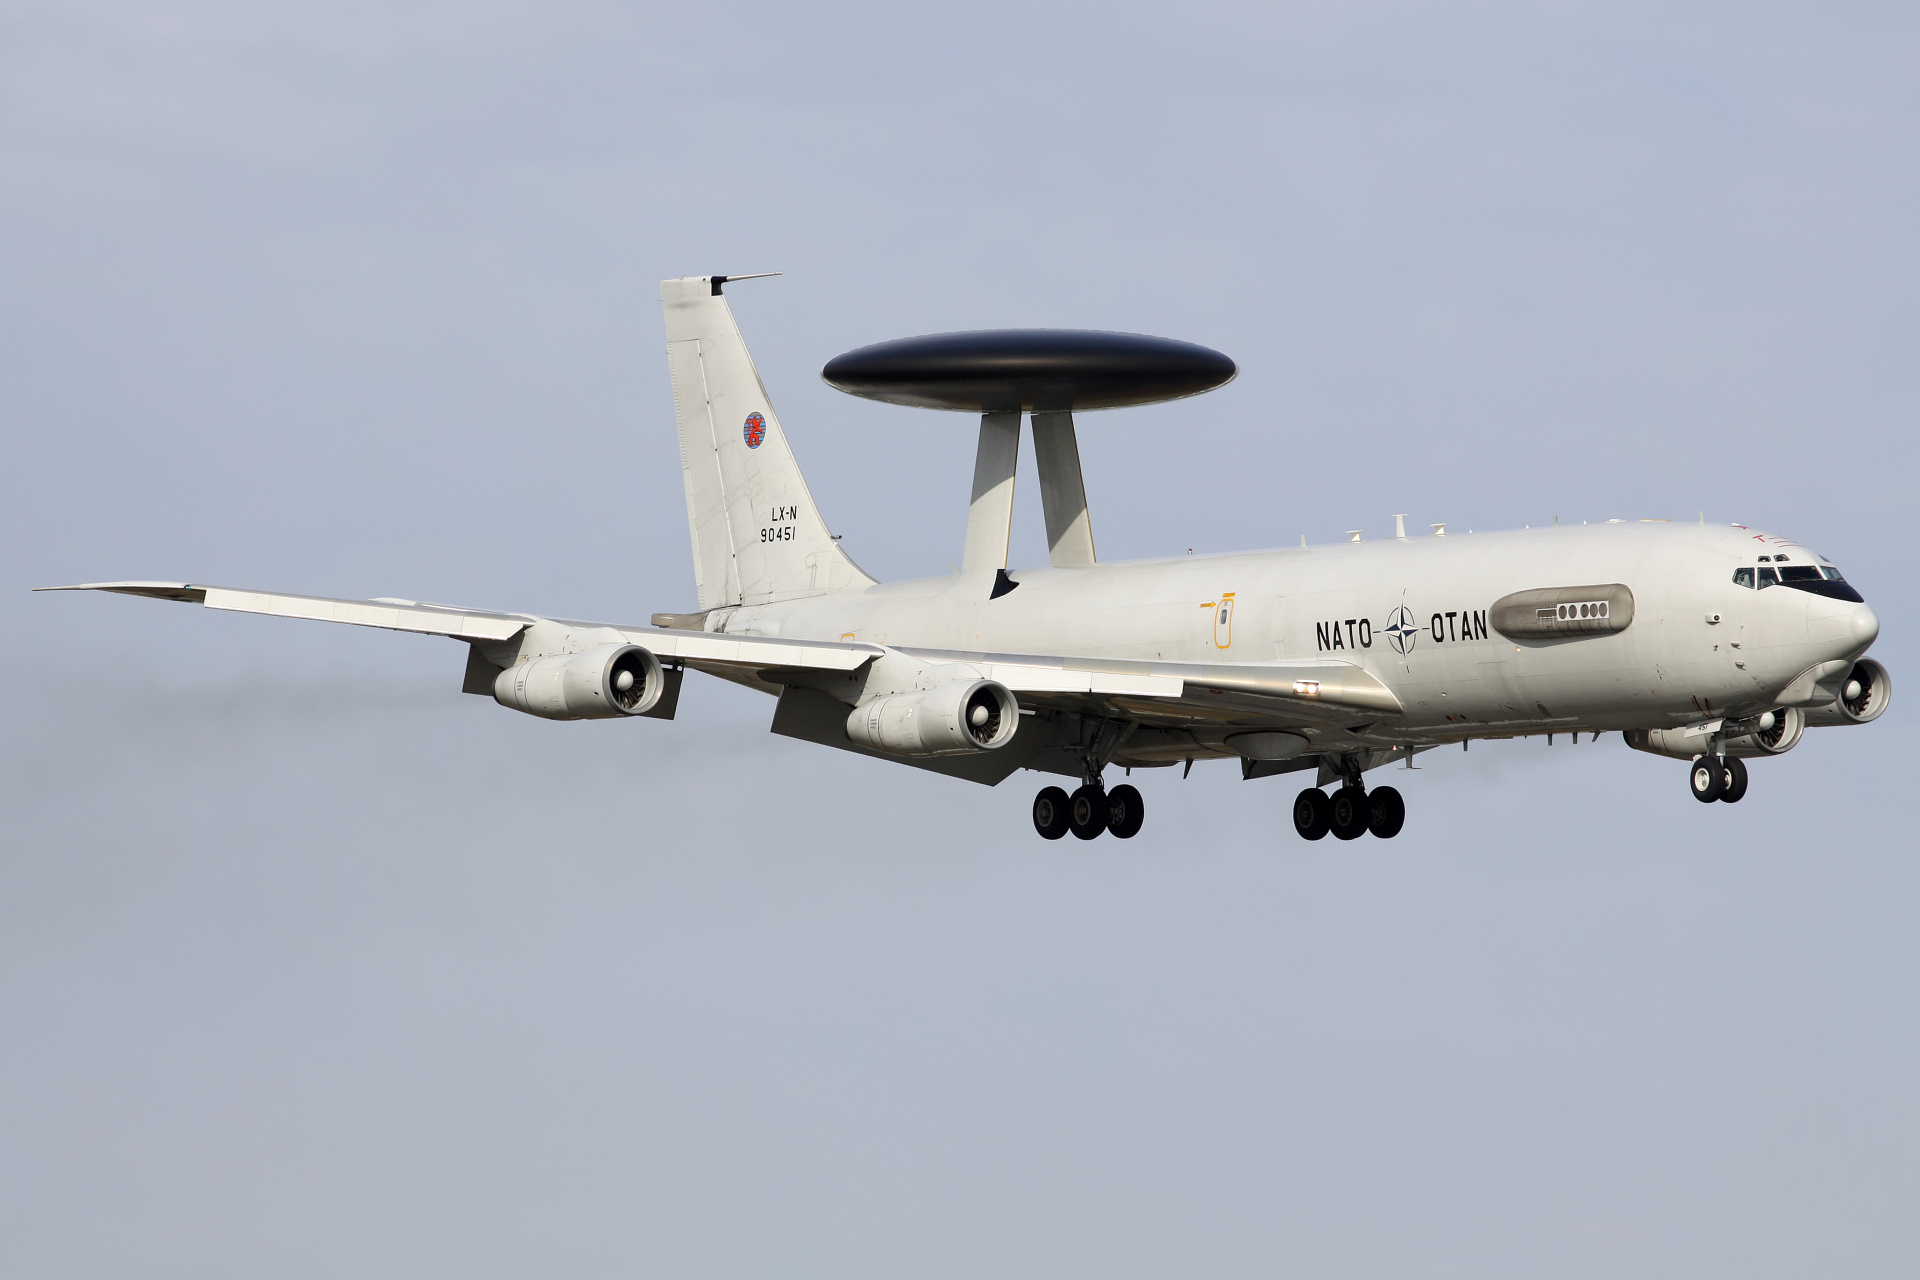 LX-N 90451, NATO Airborne Early Warning Force (Aircraft » EPWA Spotting » Boeing E-3A Sentry)